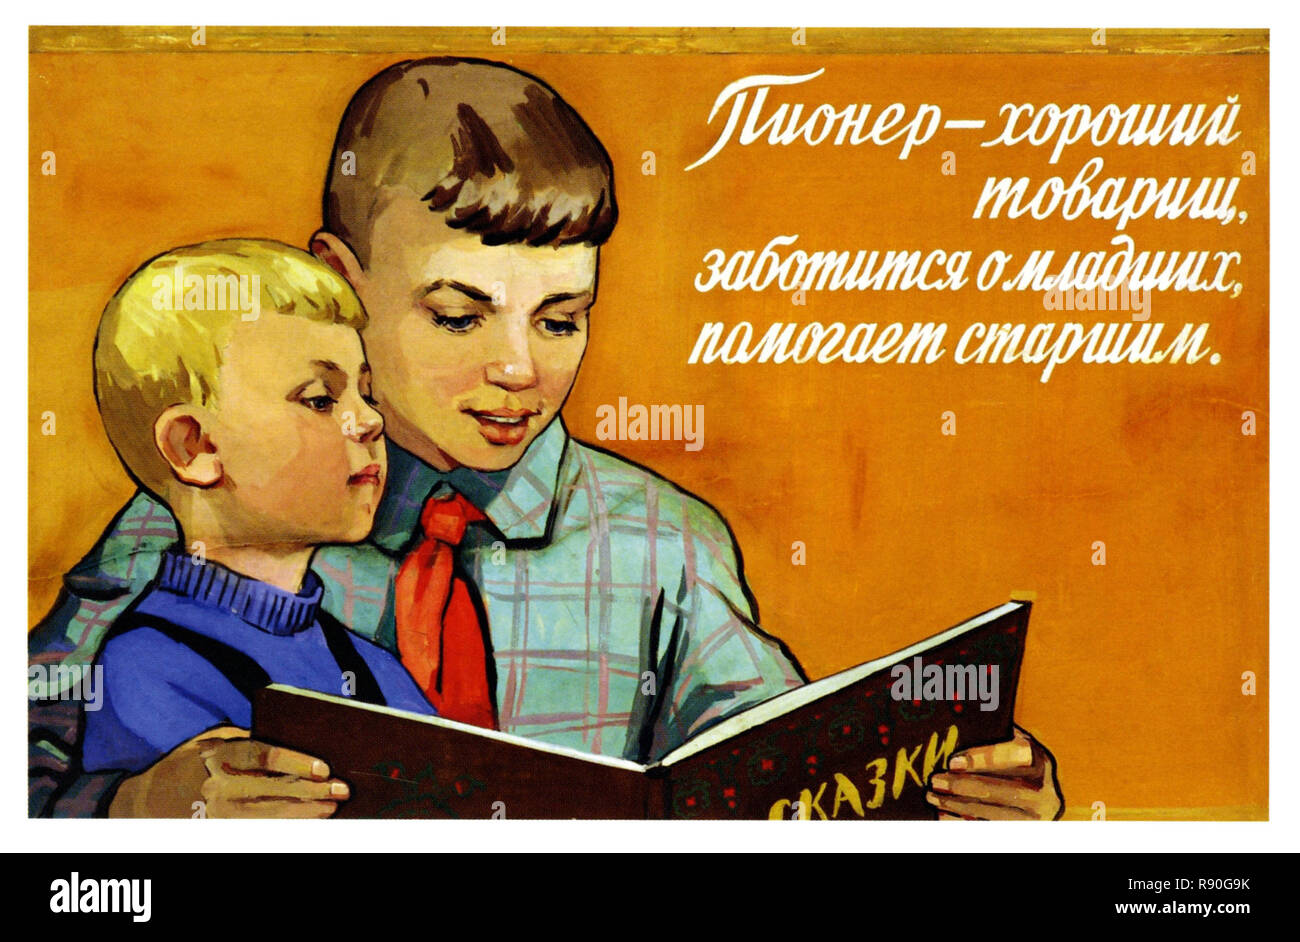 A Pioneer Is A Good Friend He Takes Care Of Youngsters And Helps Grownups - Vintage U.S.S.R Communist Propaganda Poster Stock Photo